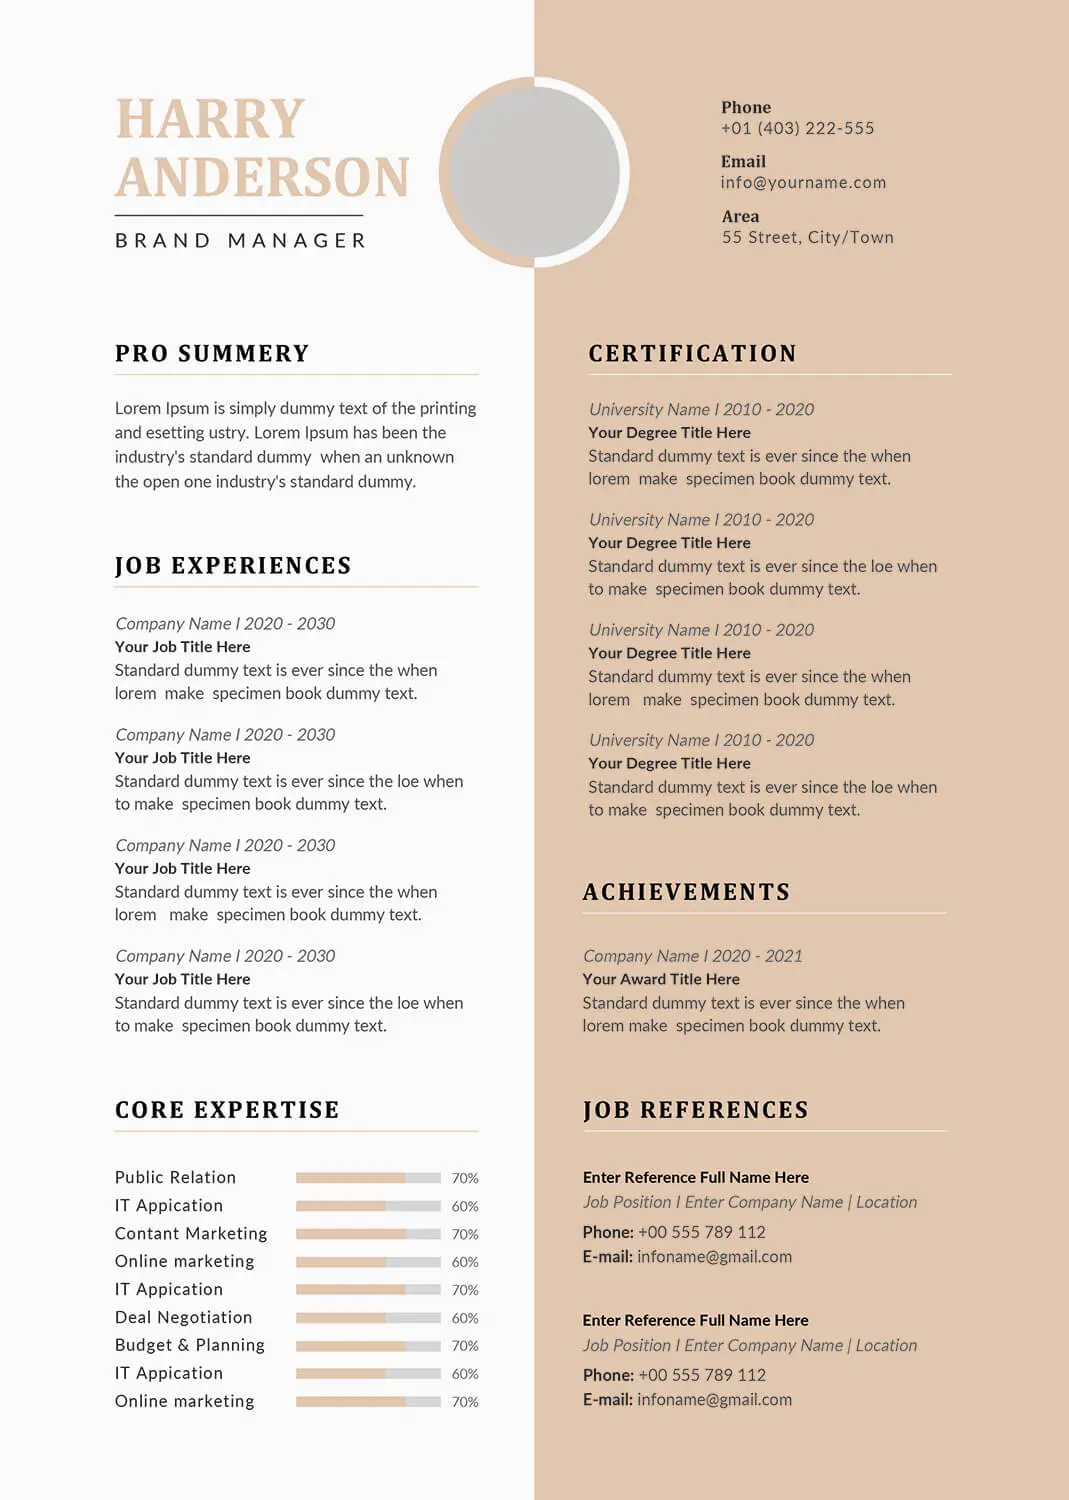 Best resume format for security
and protective services professionals